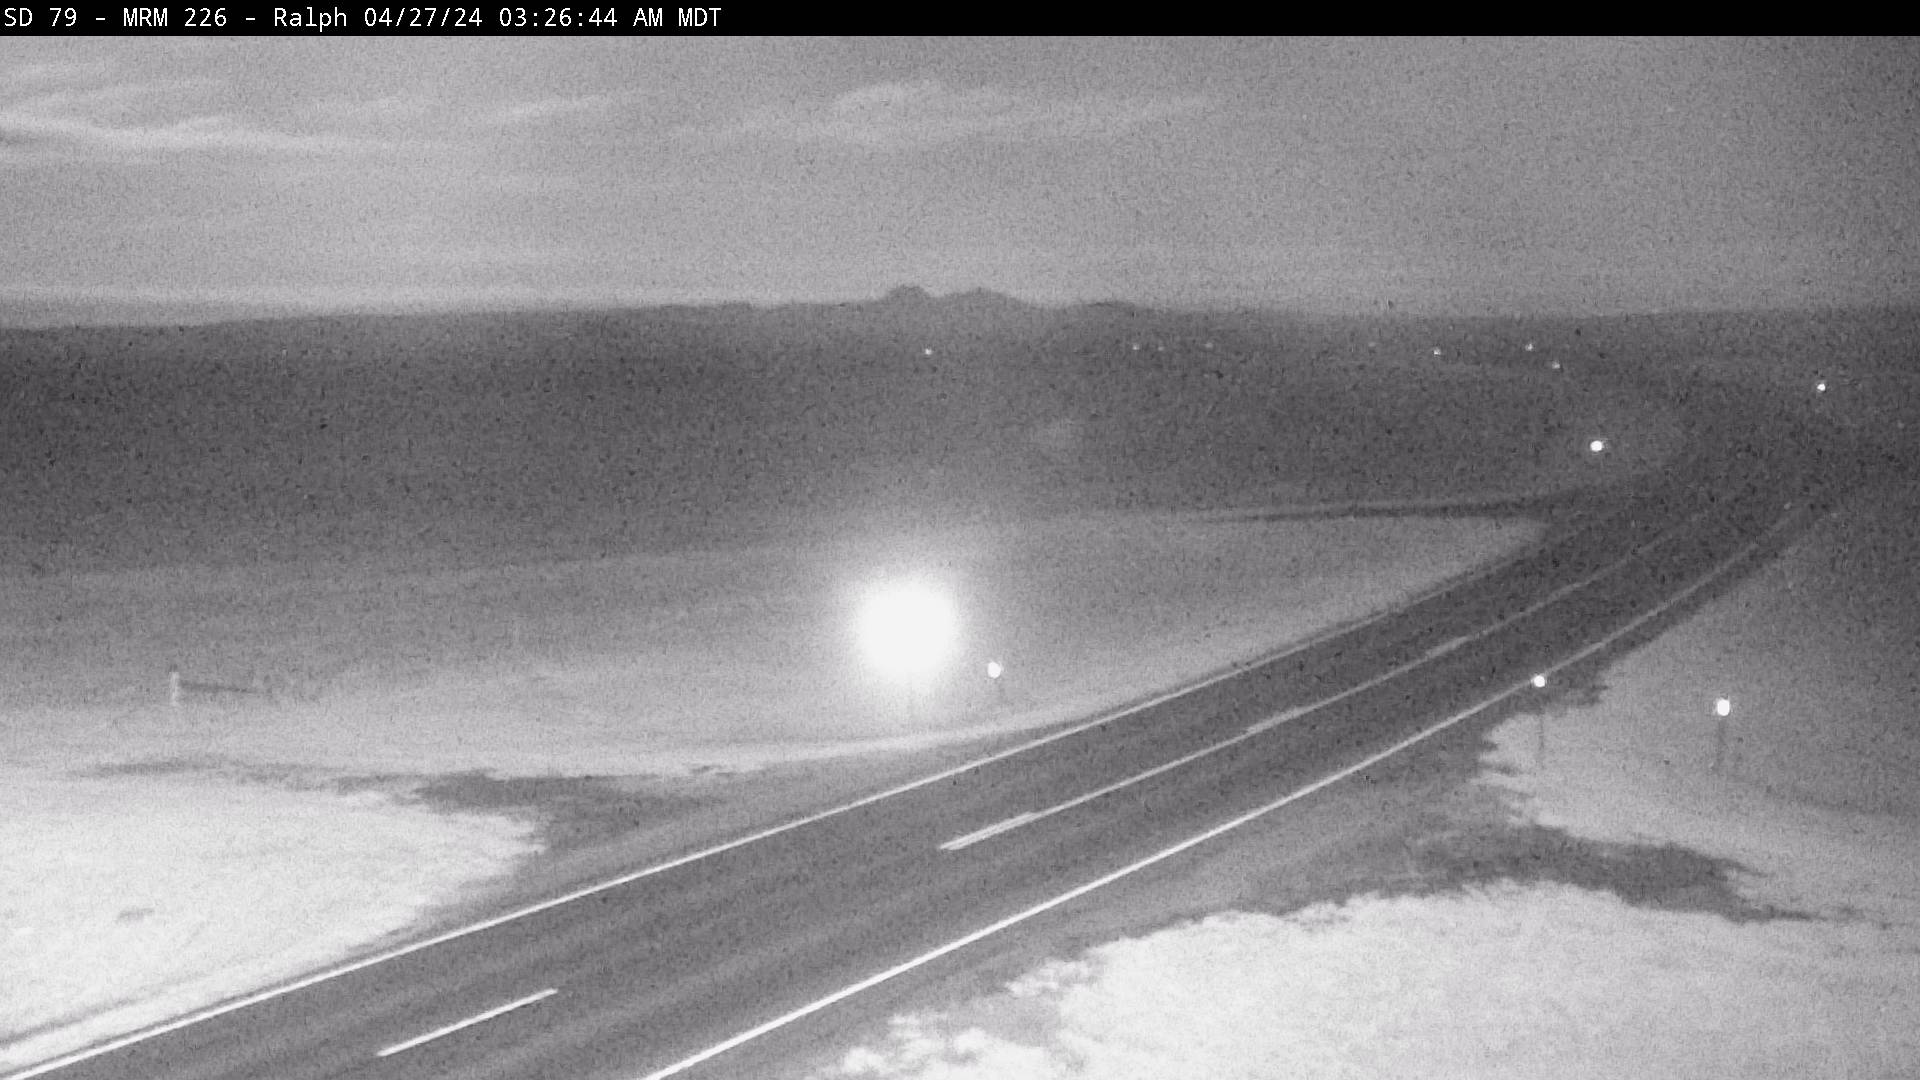 Traffic Cam north of town along SD-79 @ MP 226 - South Player